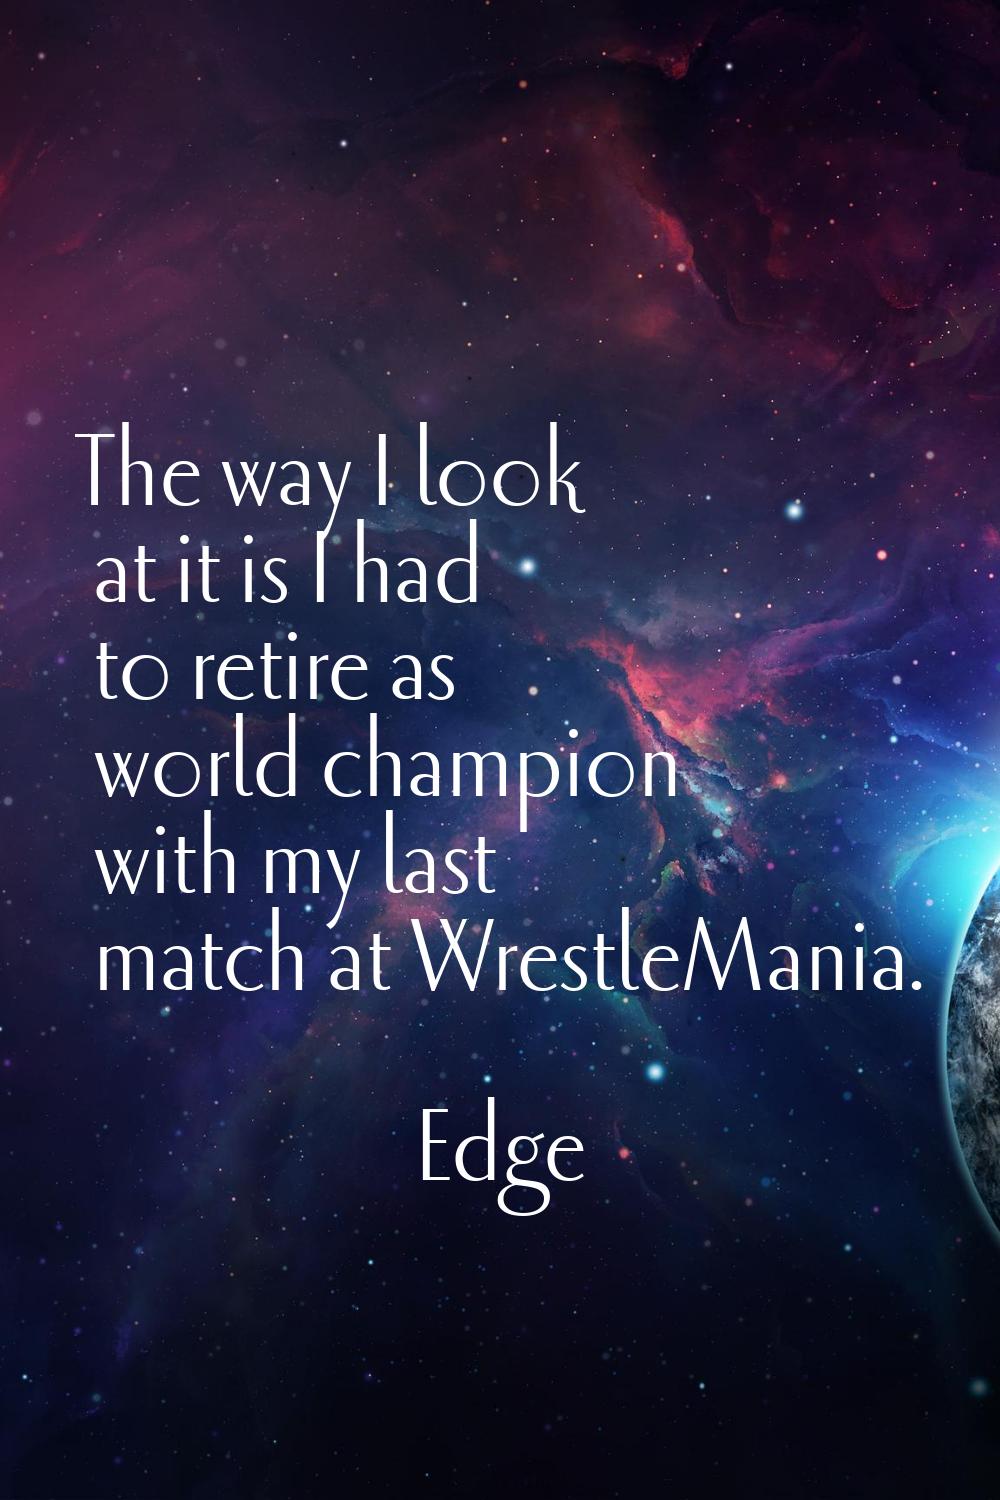 The way I look at it is I had to retire as world champion with my last match at WrestleMania.